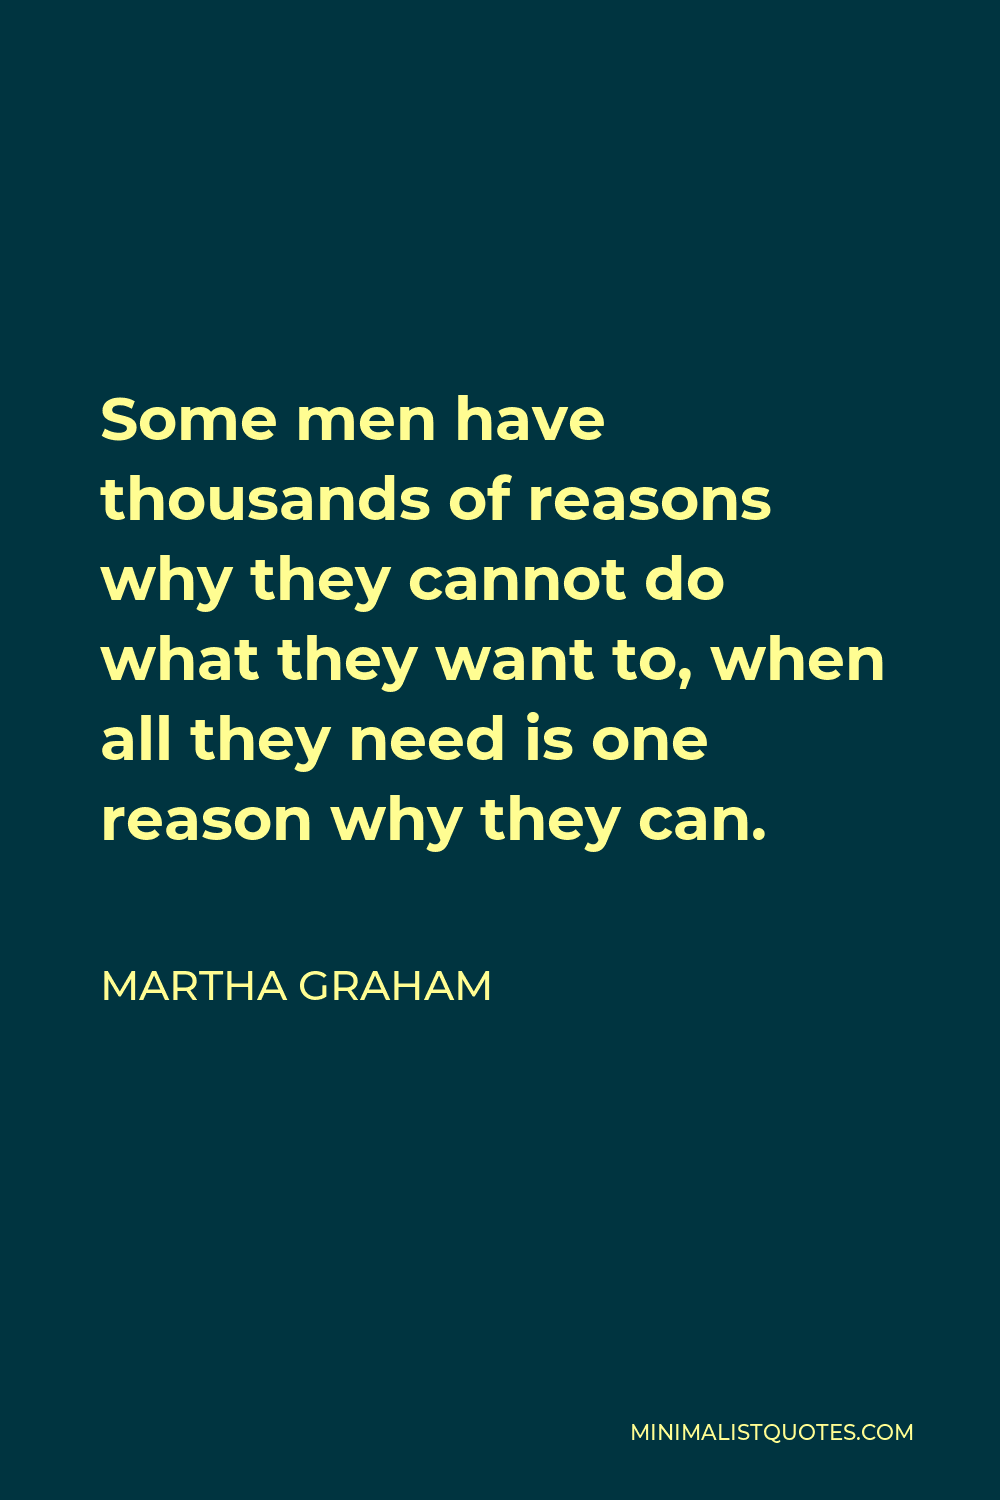 Martha Graham Quote - Some men have thousands of reasons why they cannot do what they want to, when all they need is one reason why they can.